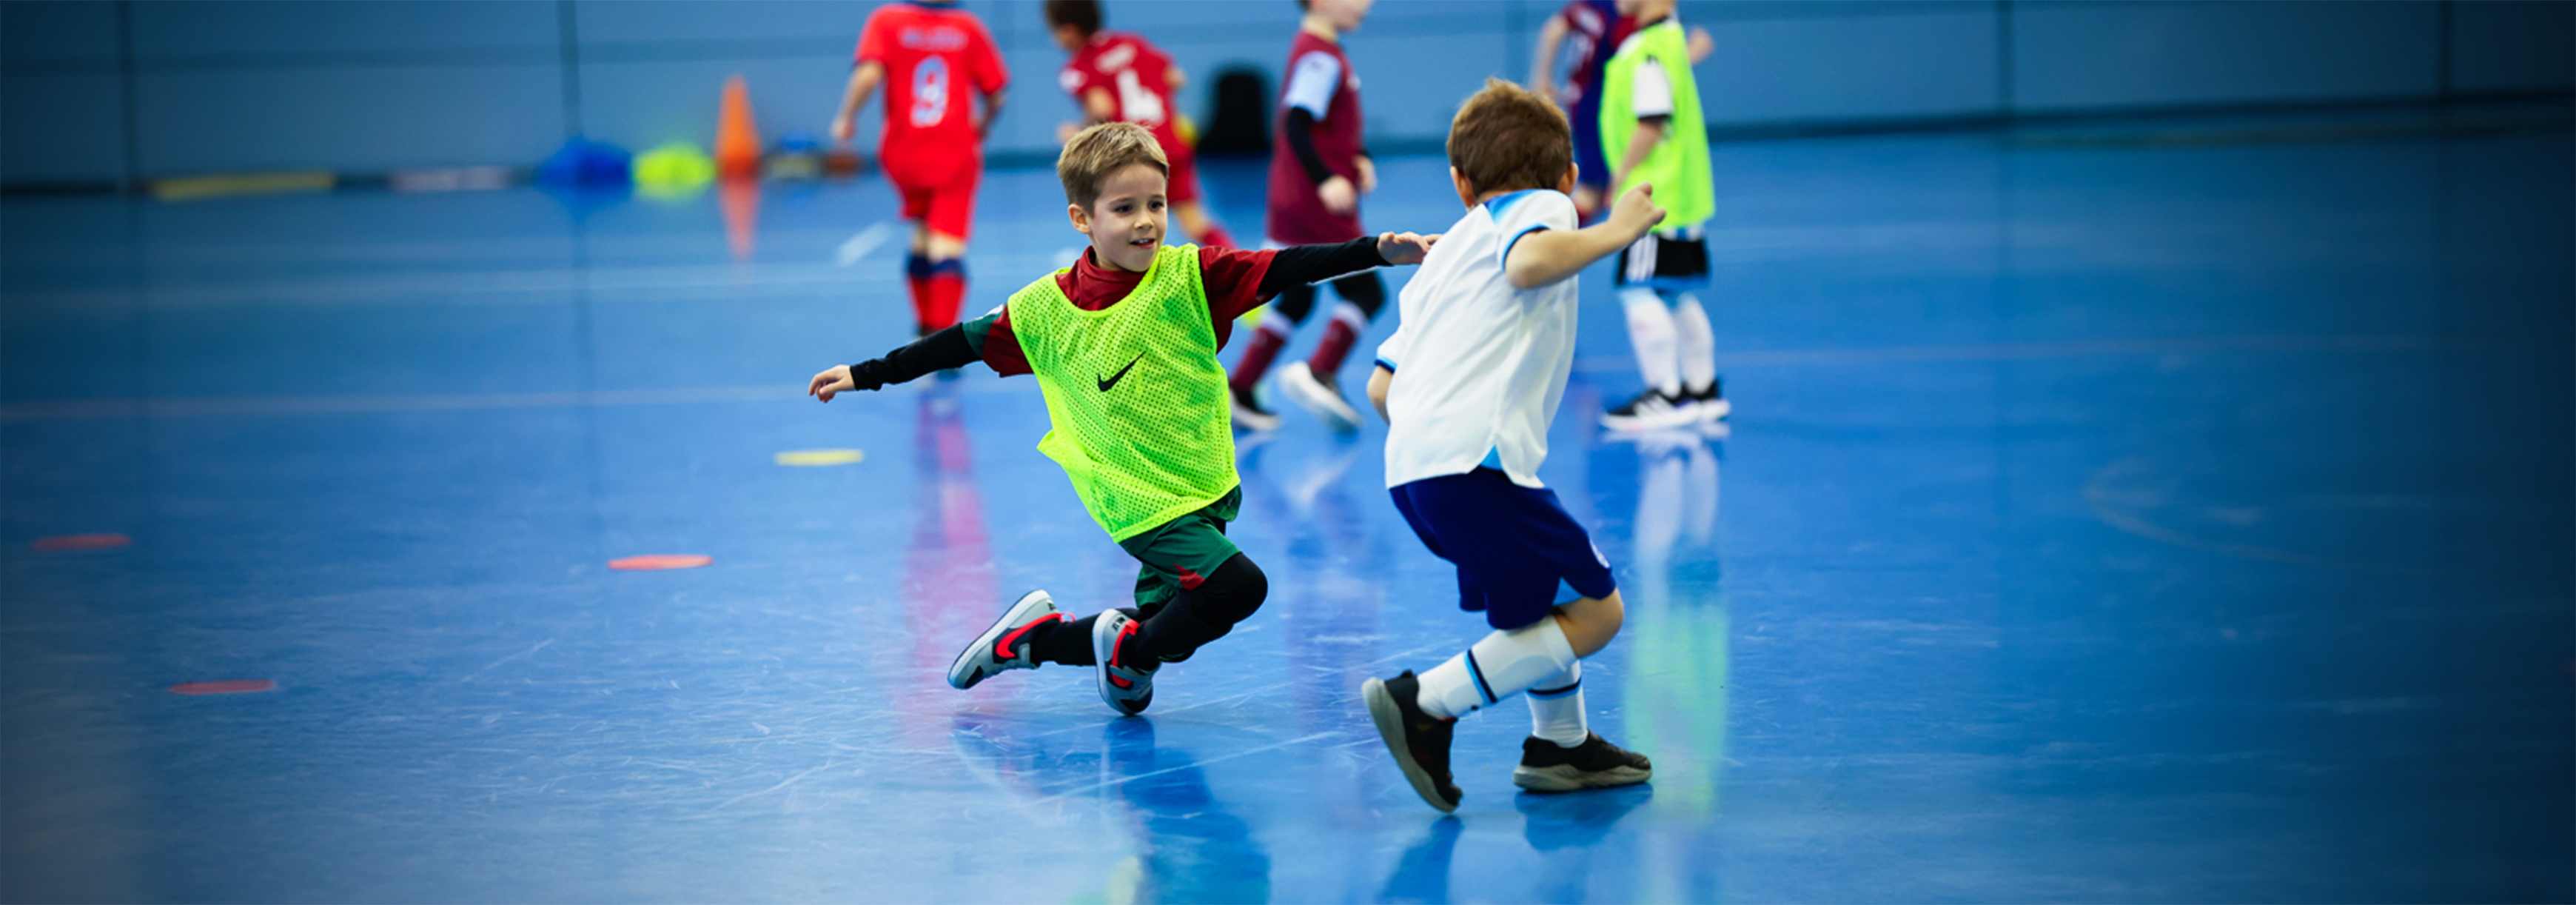 Two young players playing tag on a futsal court.